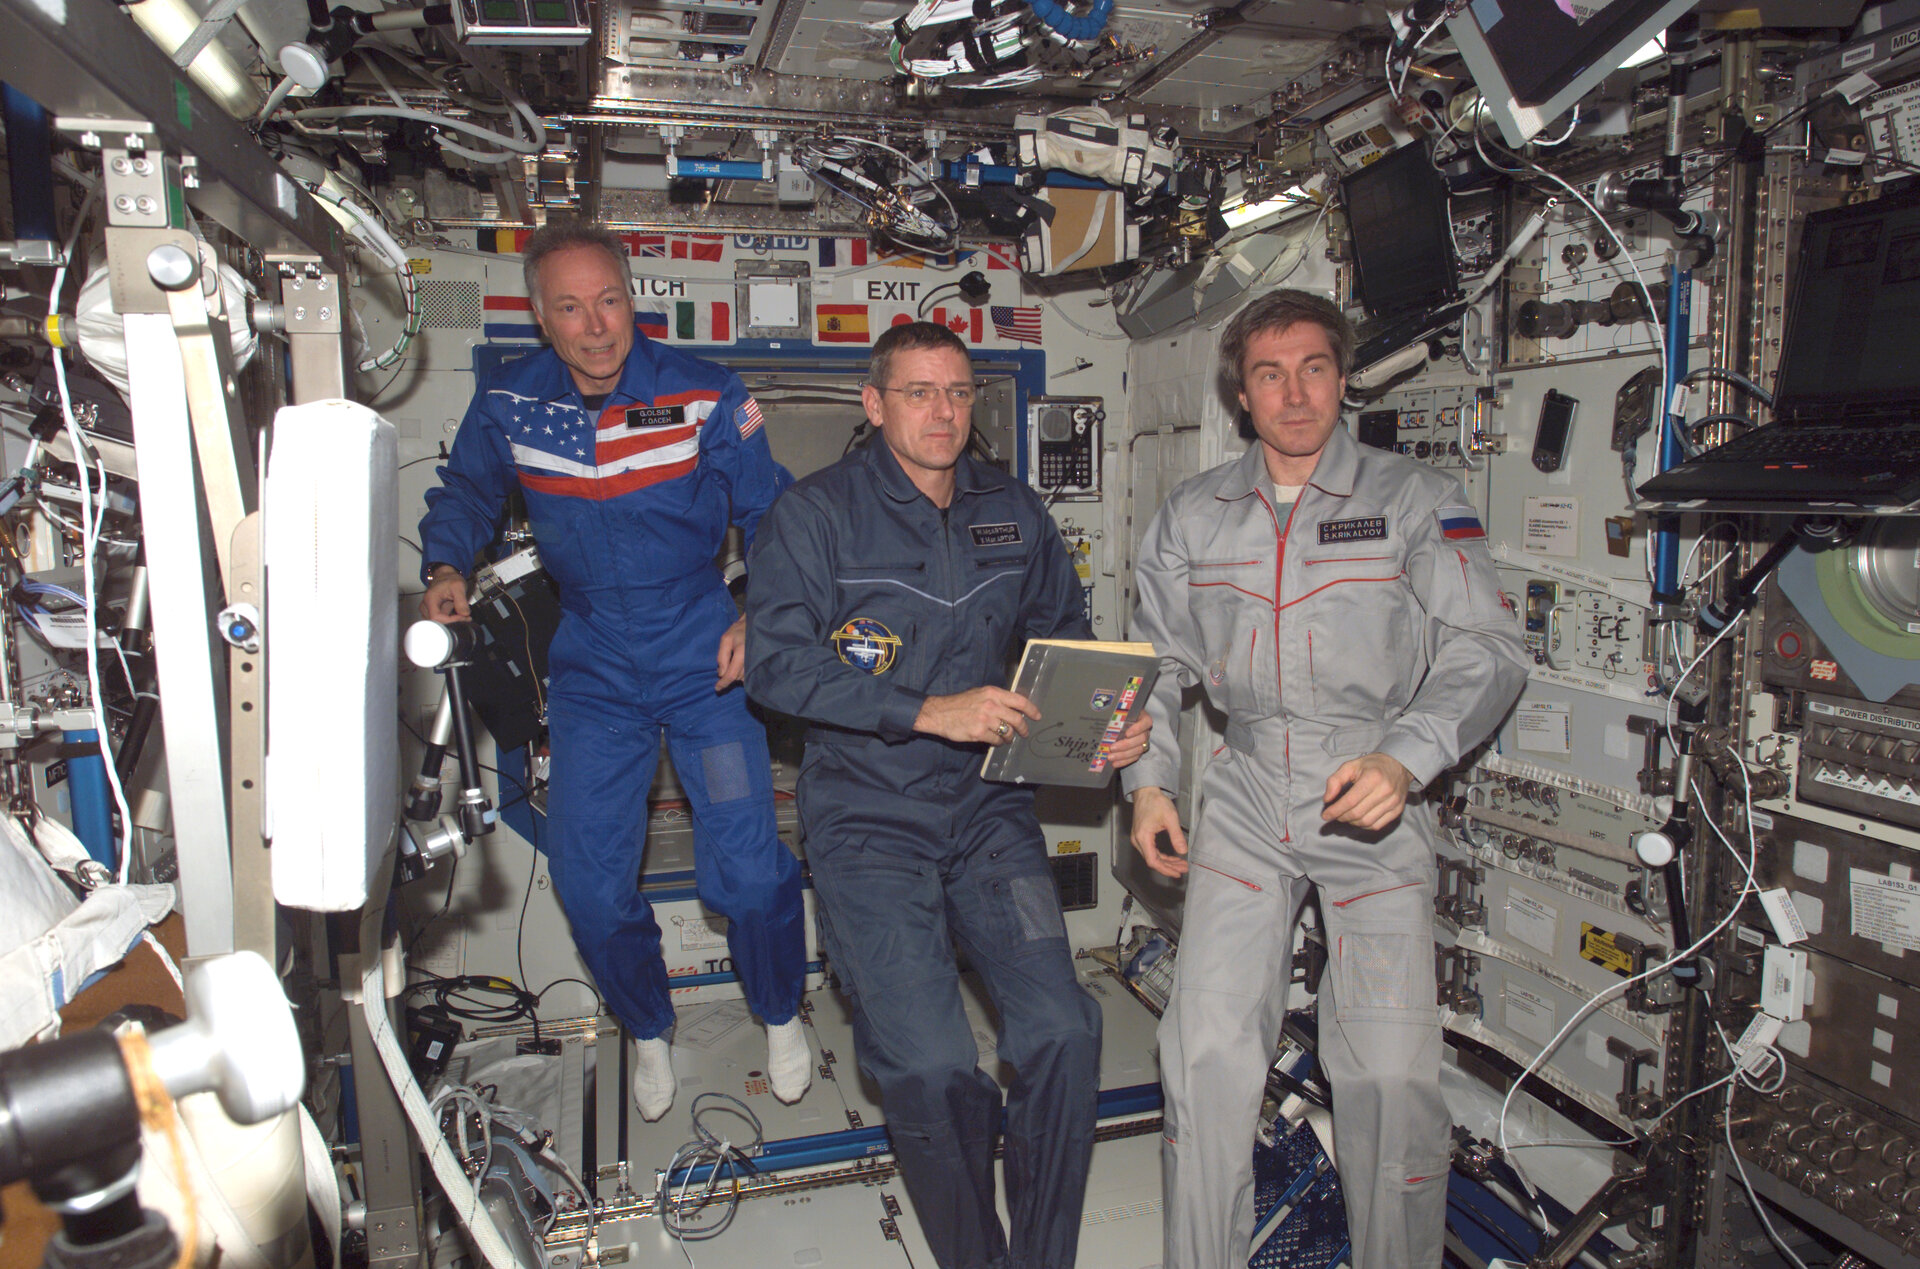 Dr Olsen spent 10 days on board the ISS in October 2005